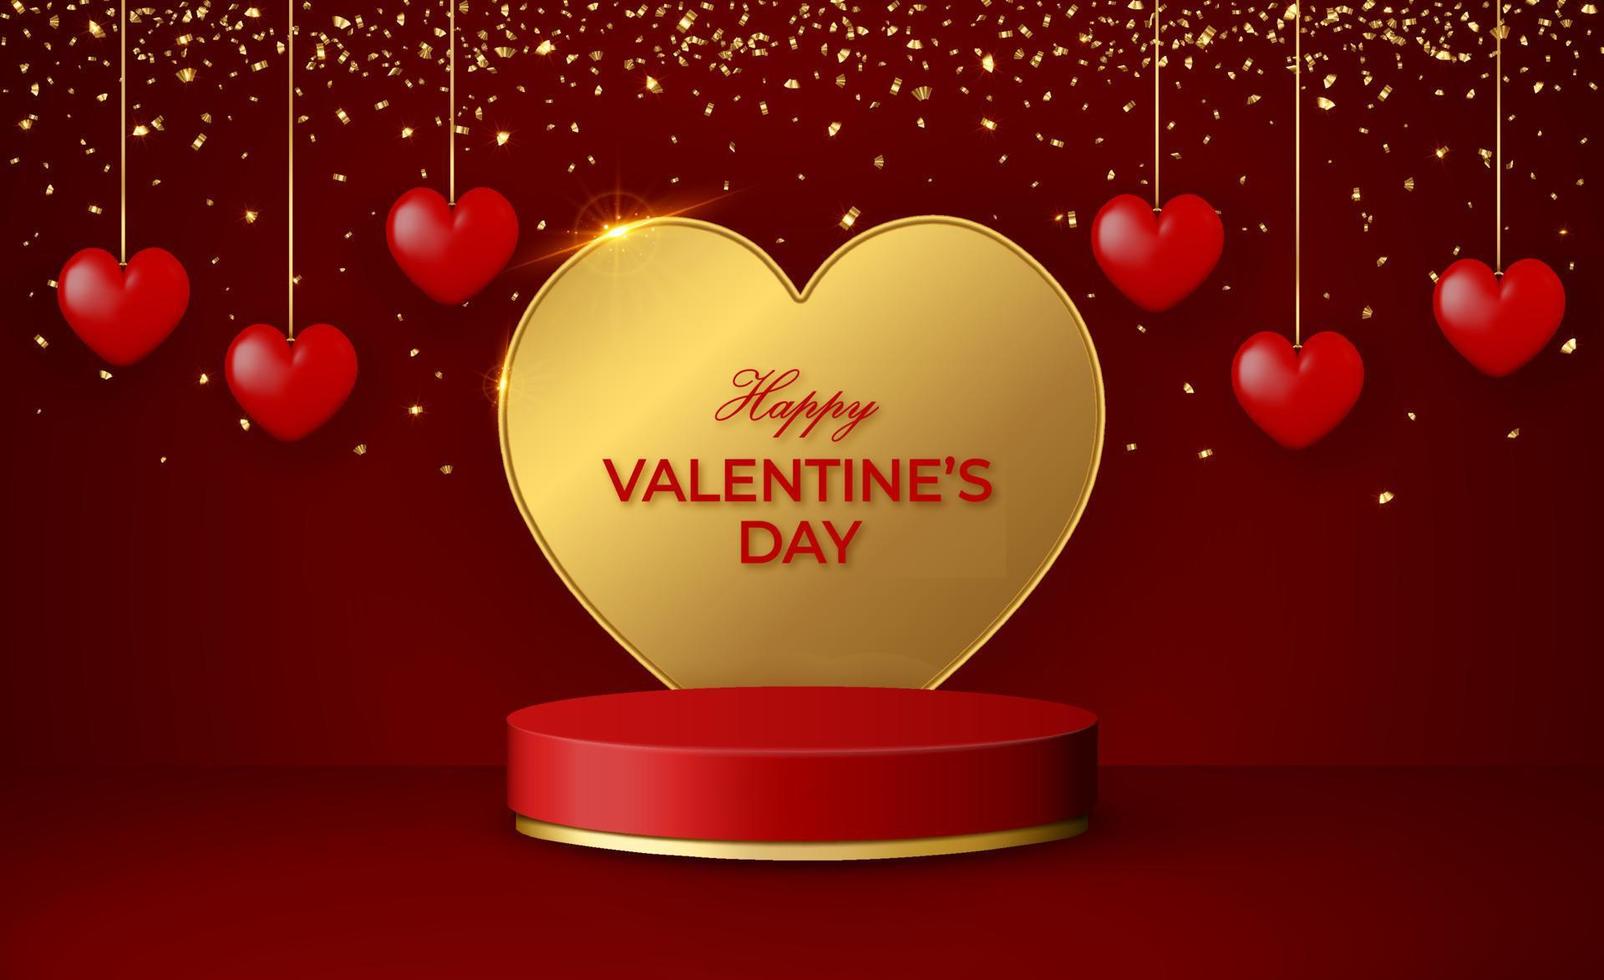 Happy Valentine's Day 3d scene with red and gold podium platform, big golden heart, garlands and confetti. vector